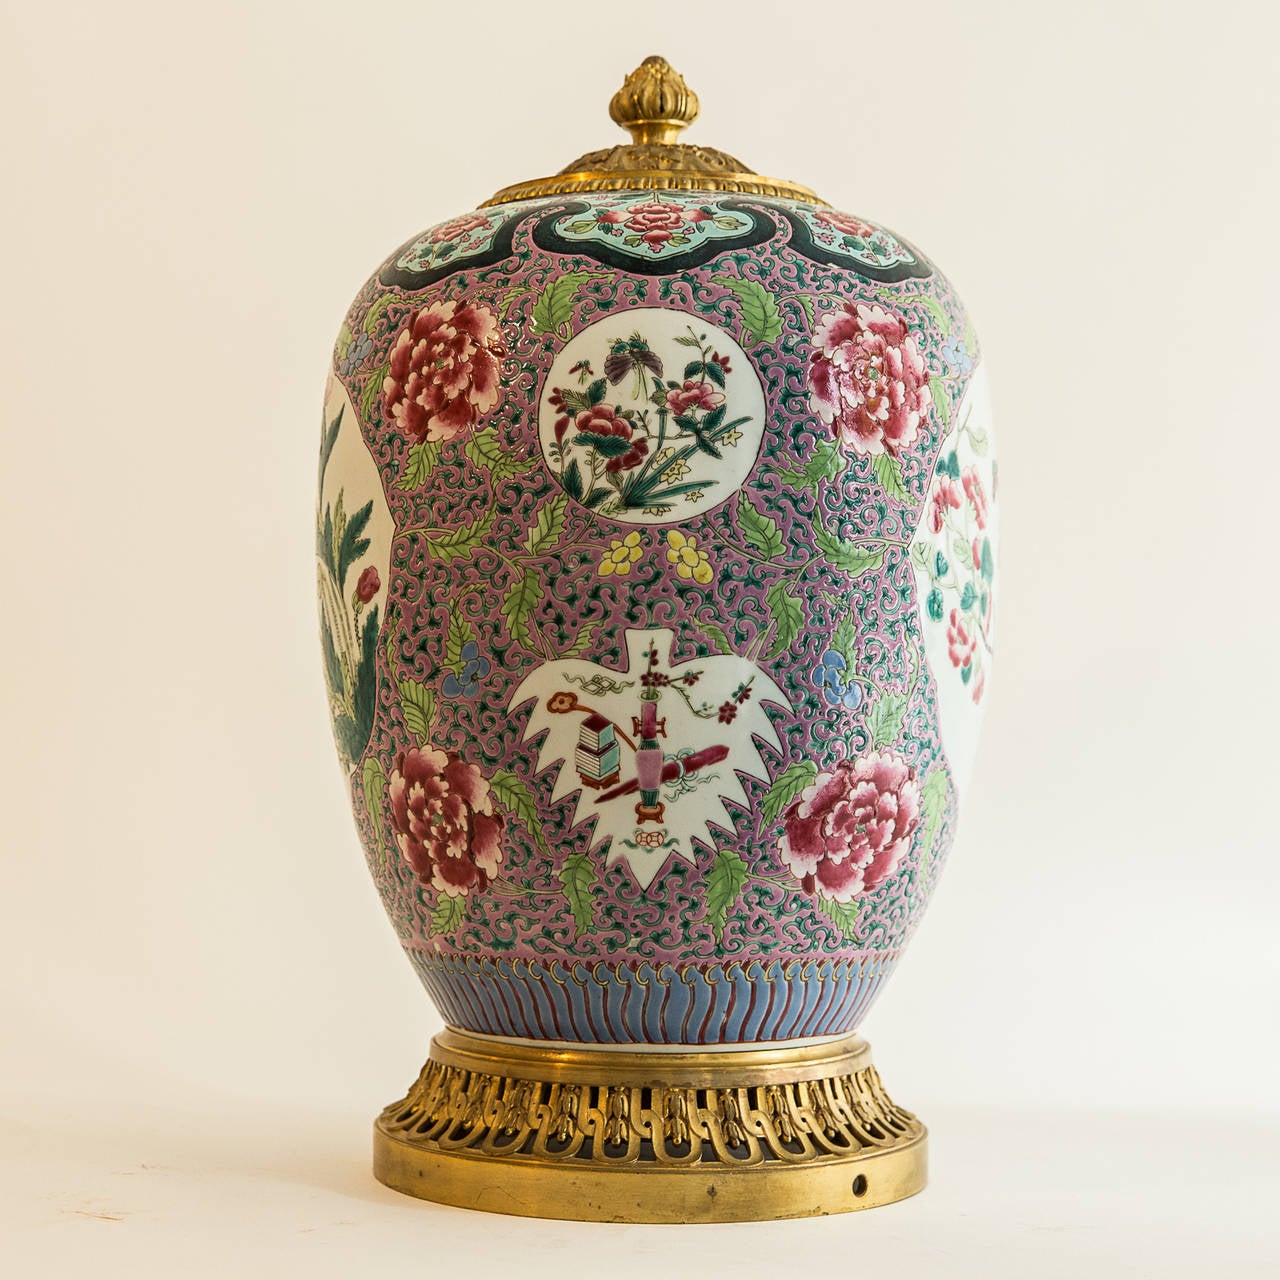 A very fine 19th century Famille rose vase with intricate pattern and medallions including peonies flowers. Gilt bronze mounted. A good example of early 19th century Chinese export porcelain